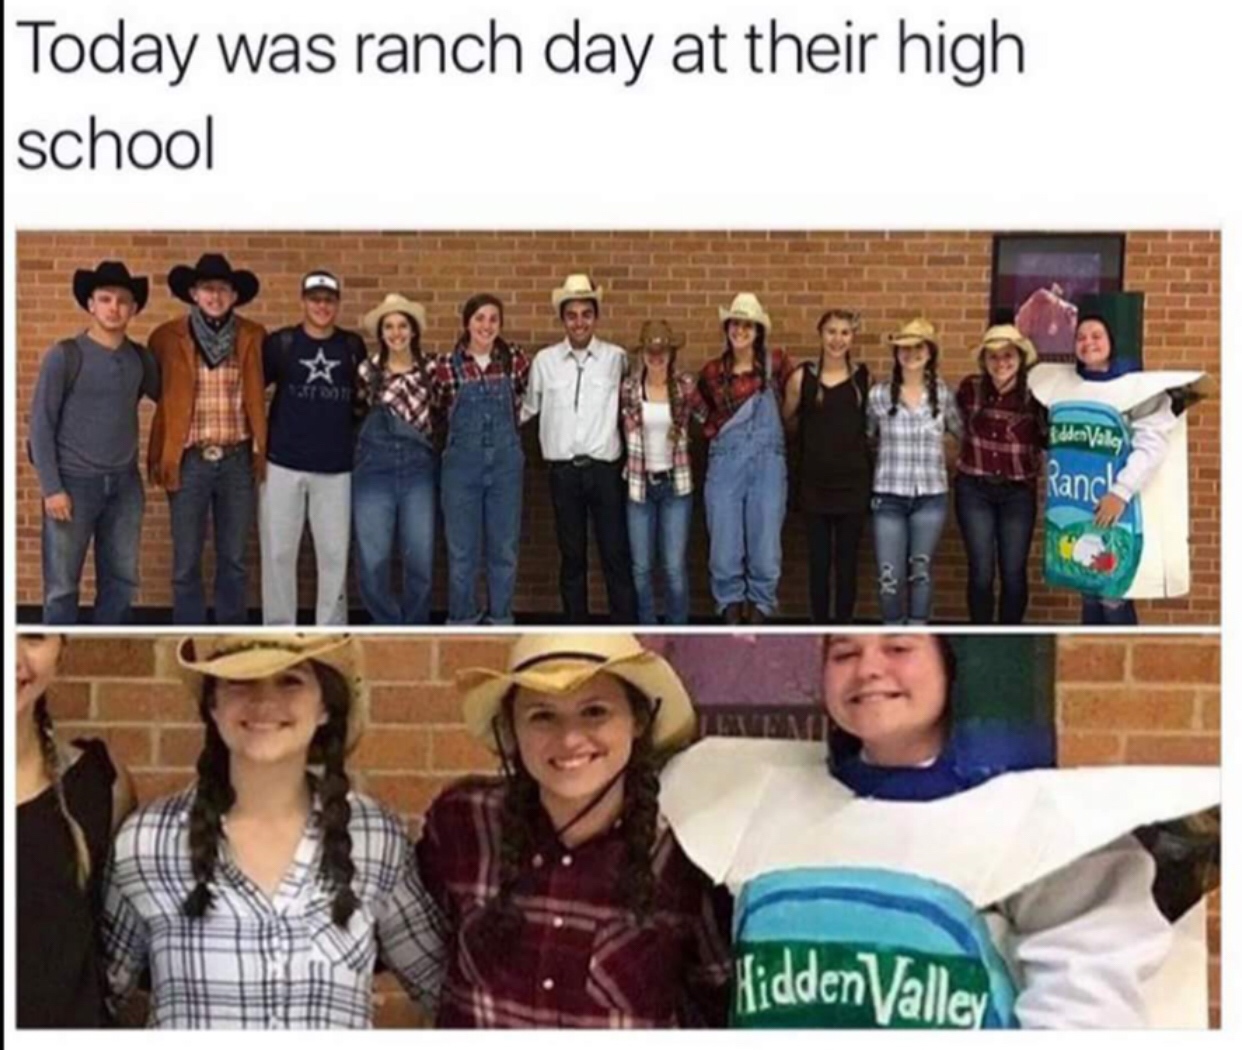 ranch day at school today - Today was ranch day at their high school kidden Valo Ranch Hidden Valley